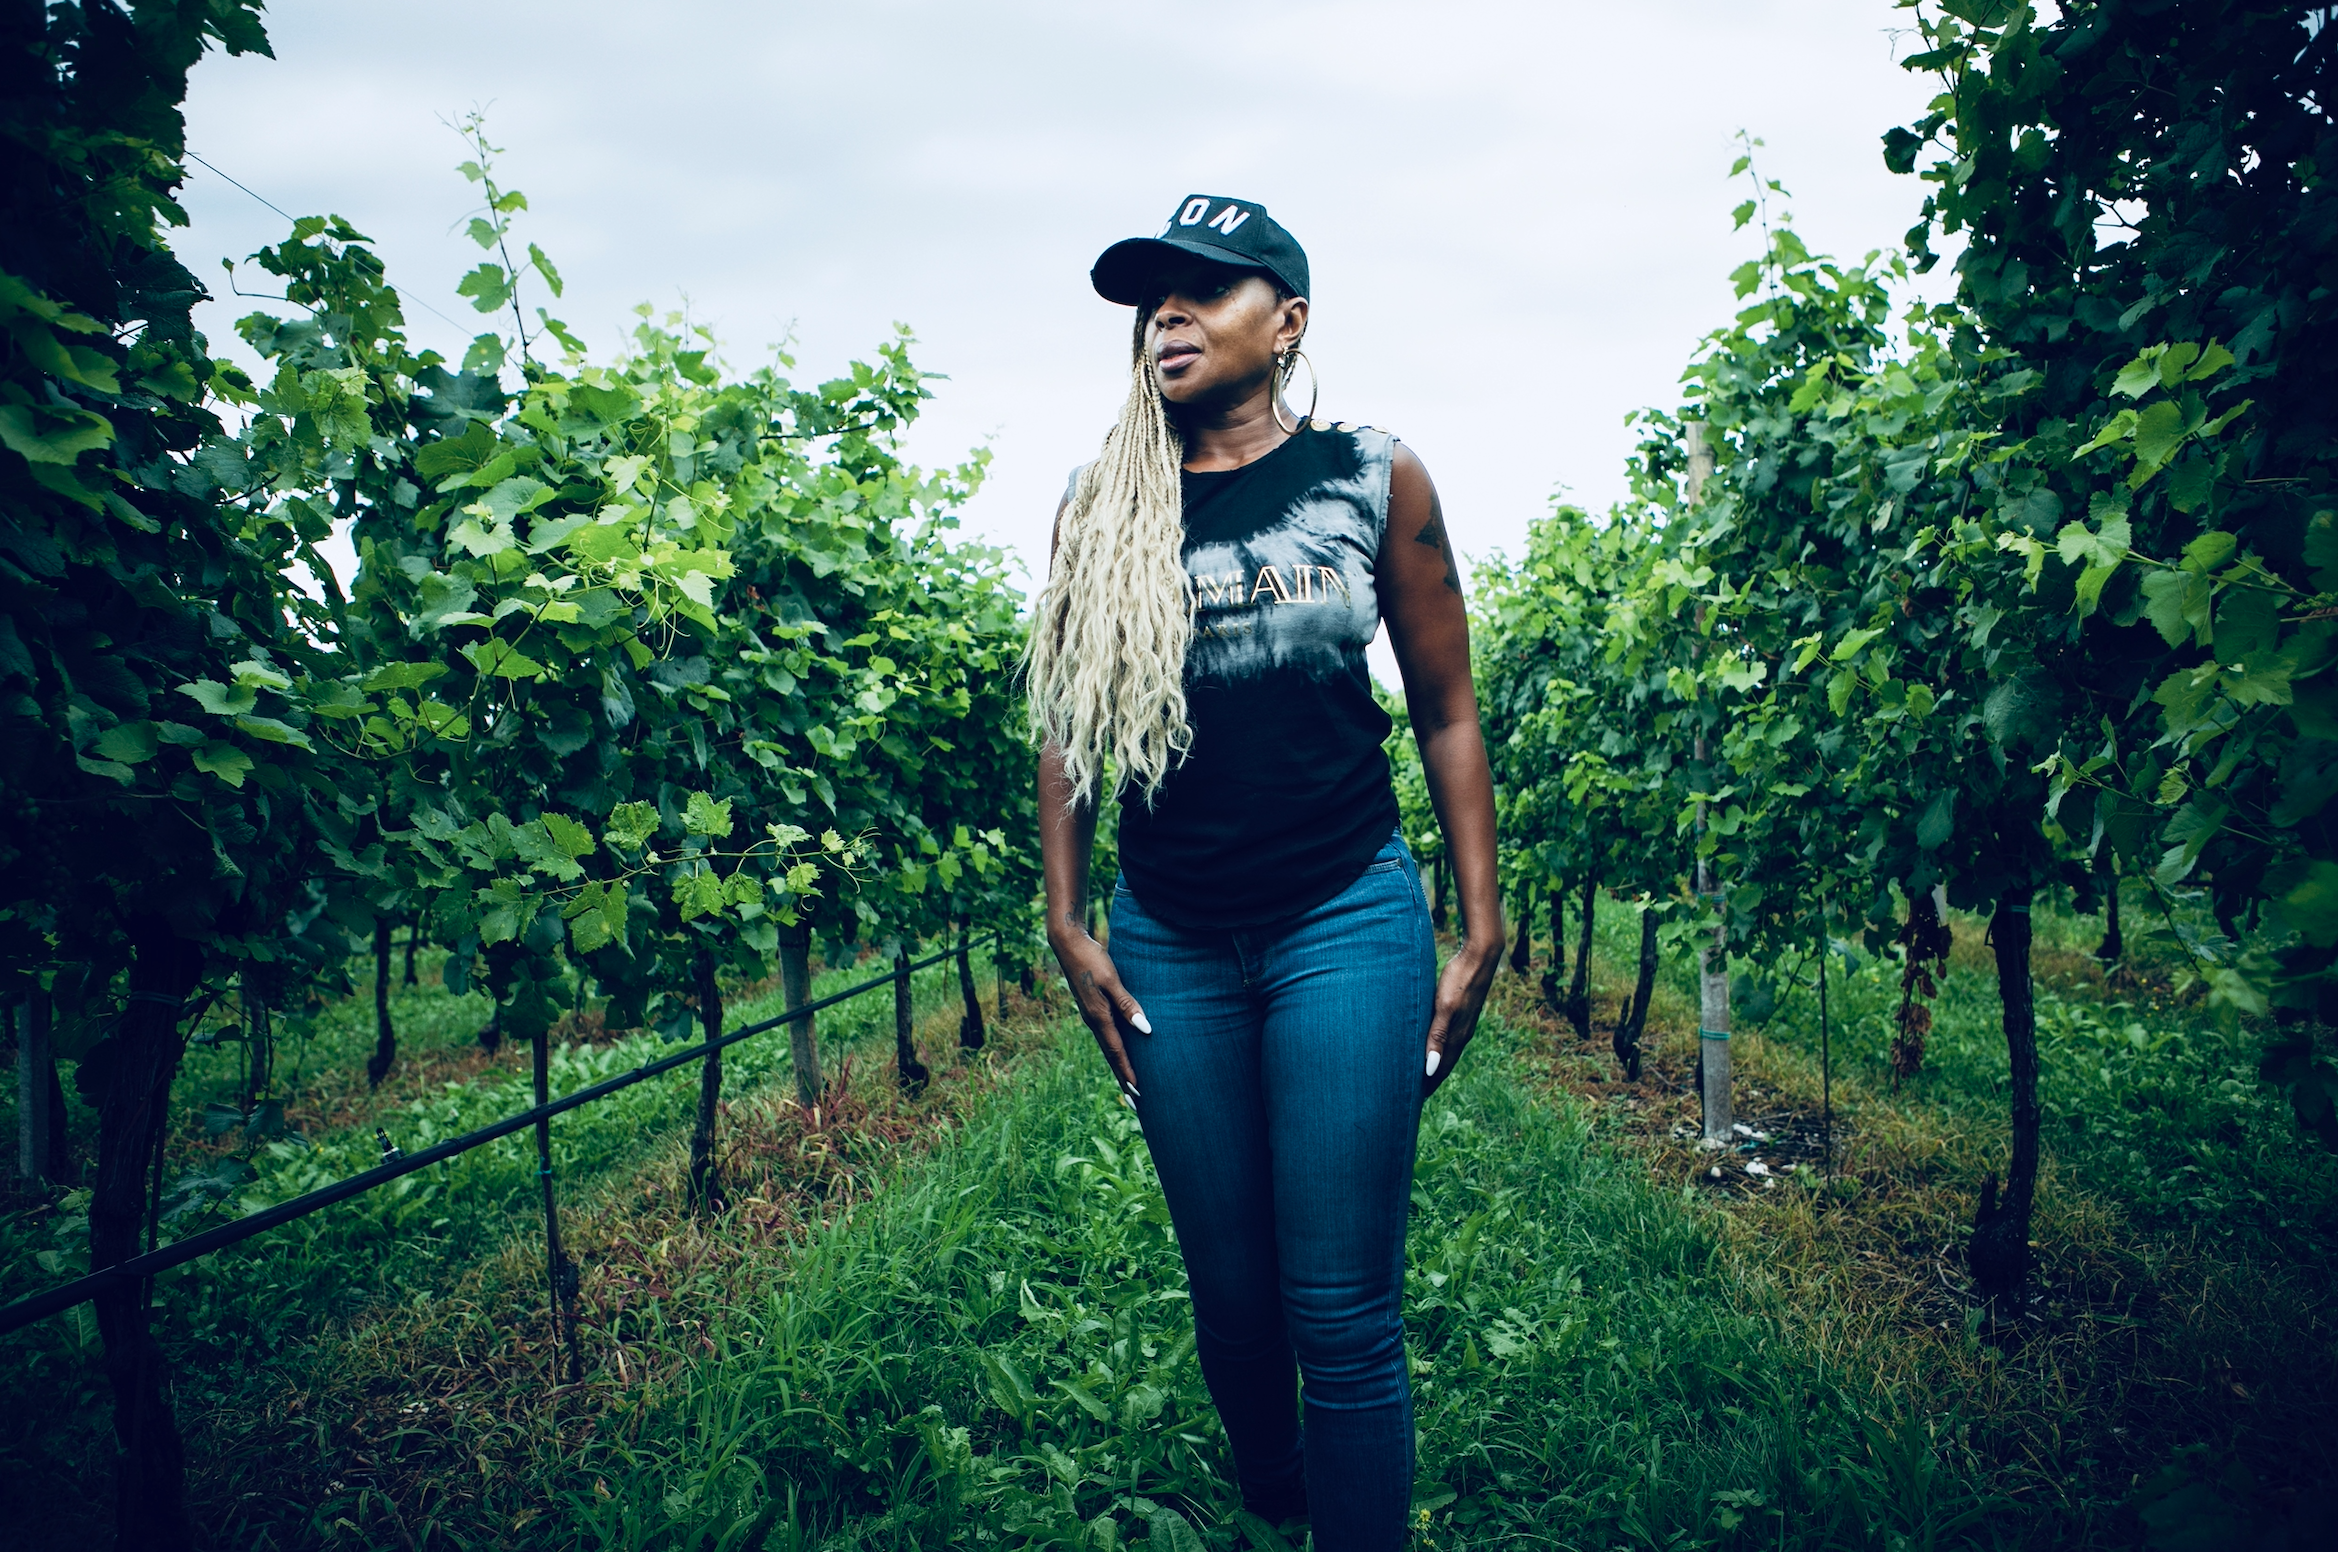 Exclusive: Mary J. Blige Launches Sun Goddess Wine